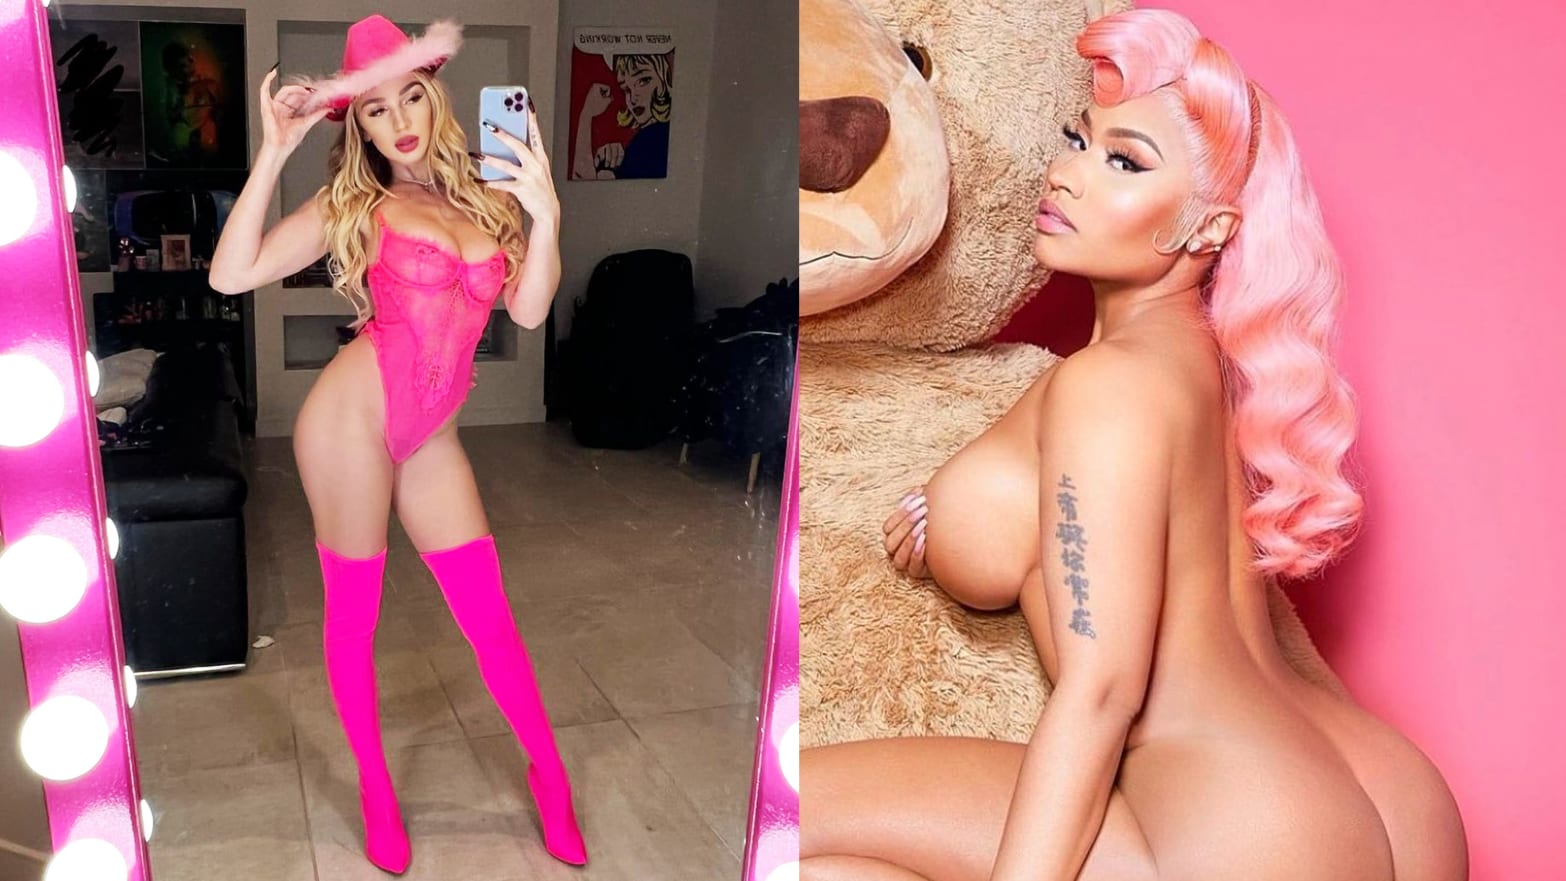 Private Parts Porn Stars - Porn Star Kendra Sunderland Asks Why Nicki Minaj Can Get Naked on Instagram  and Porn Stars Can't